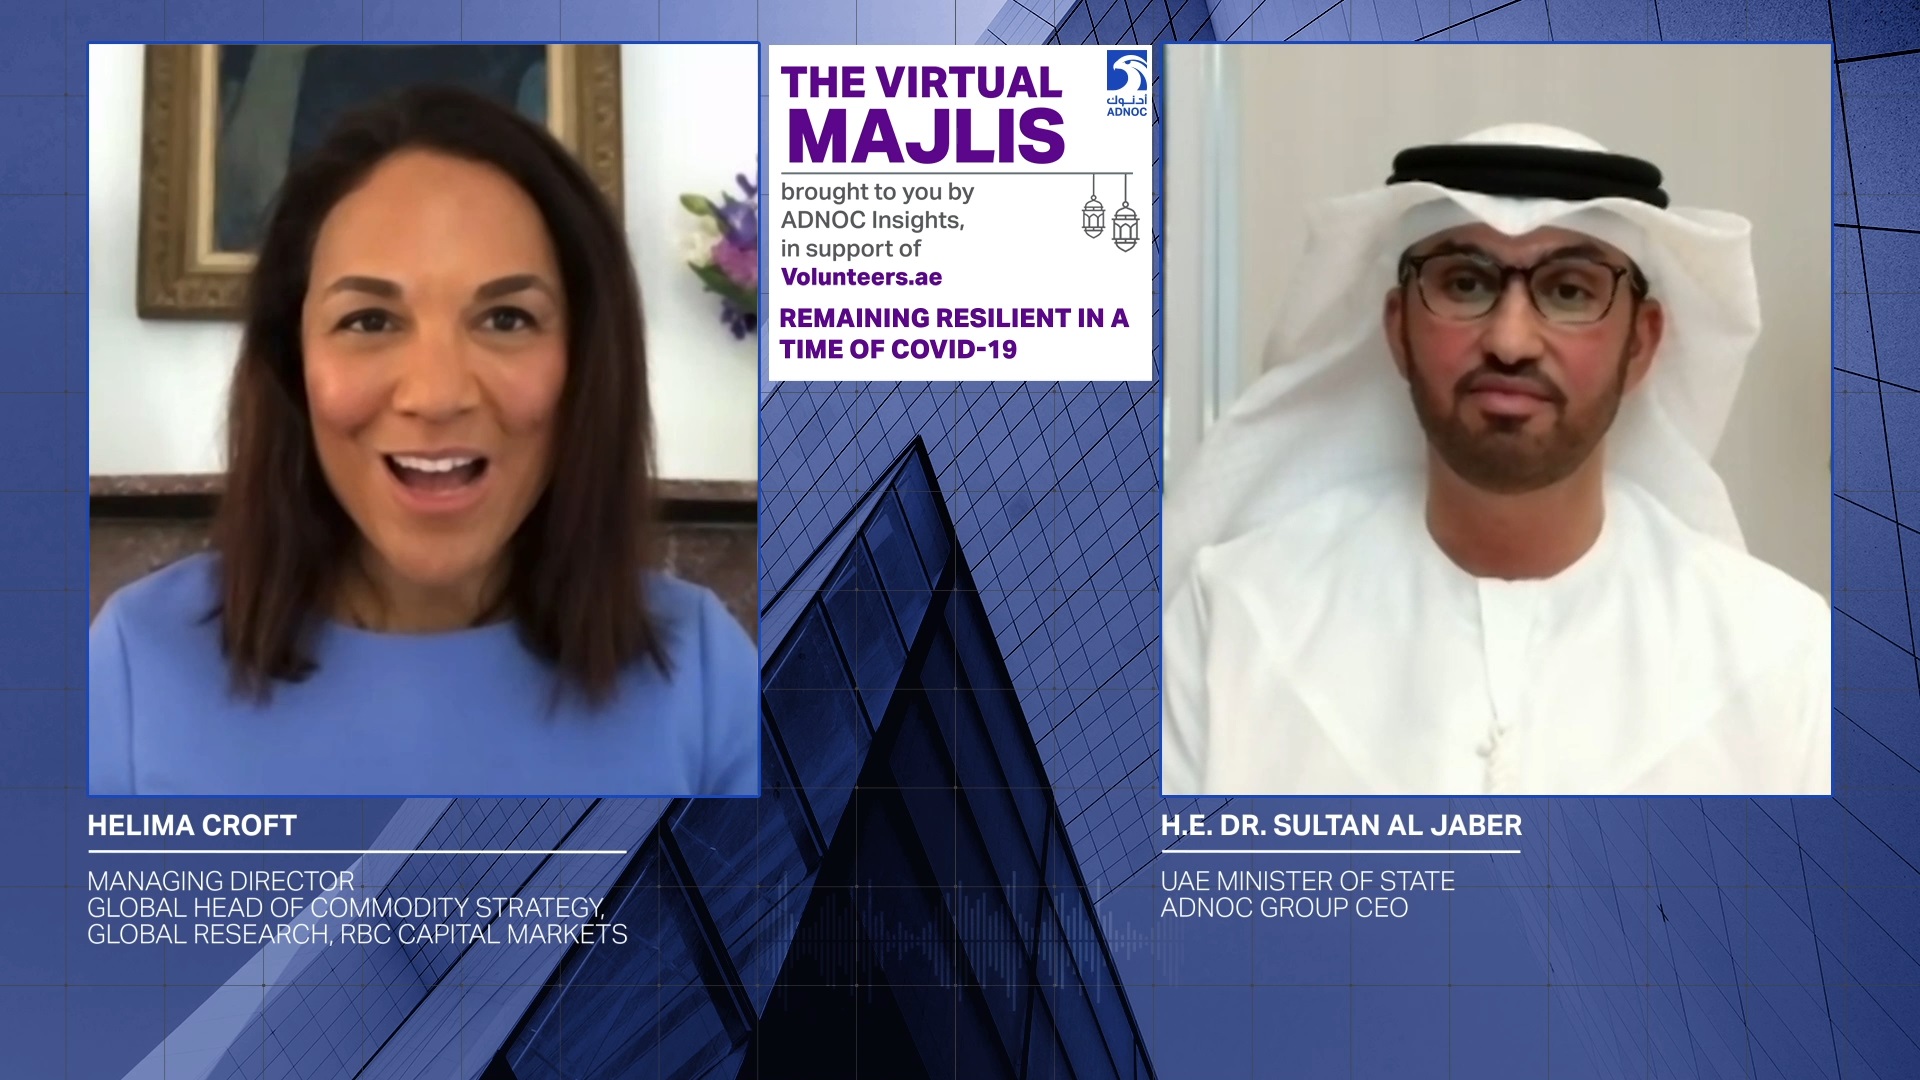 ADNOC CEO Sees Signs That Oil Markets Have Tightened In Recent Weeks And Will Rebalance Over Time